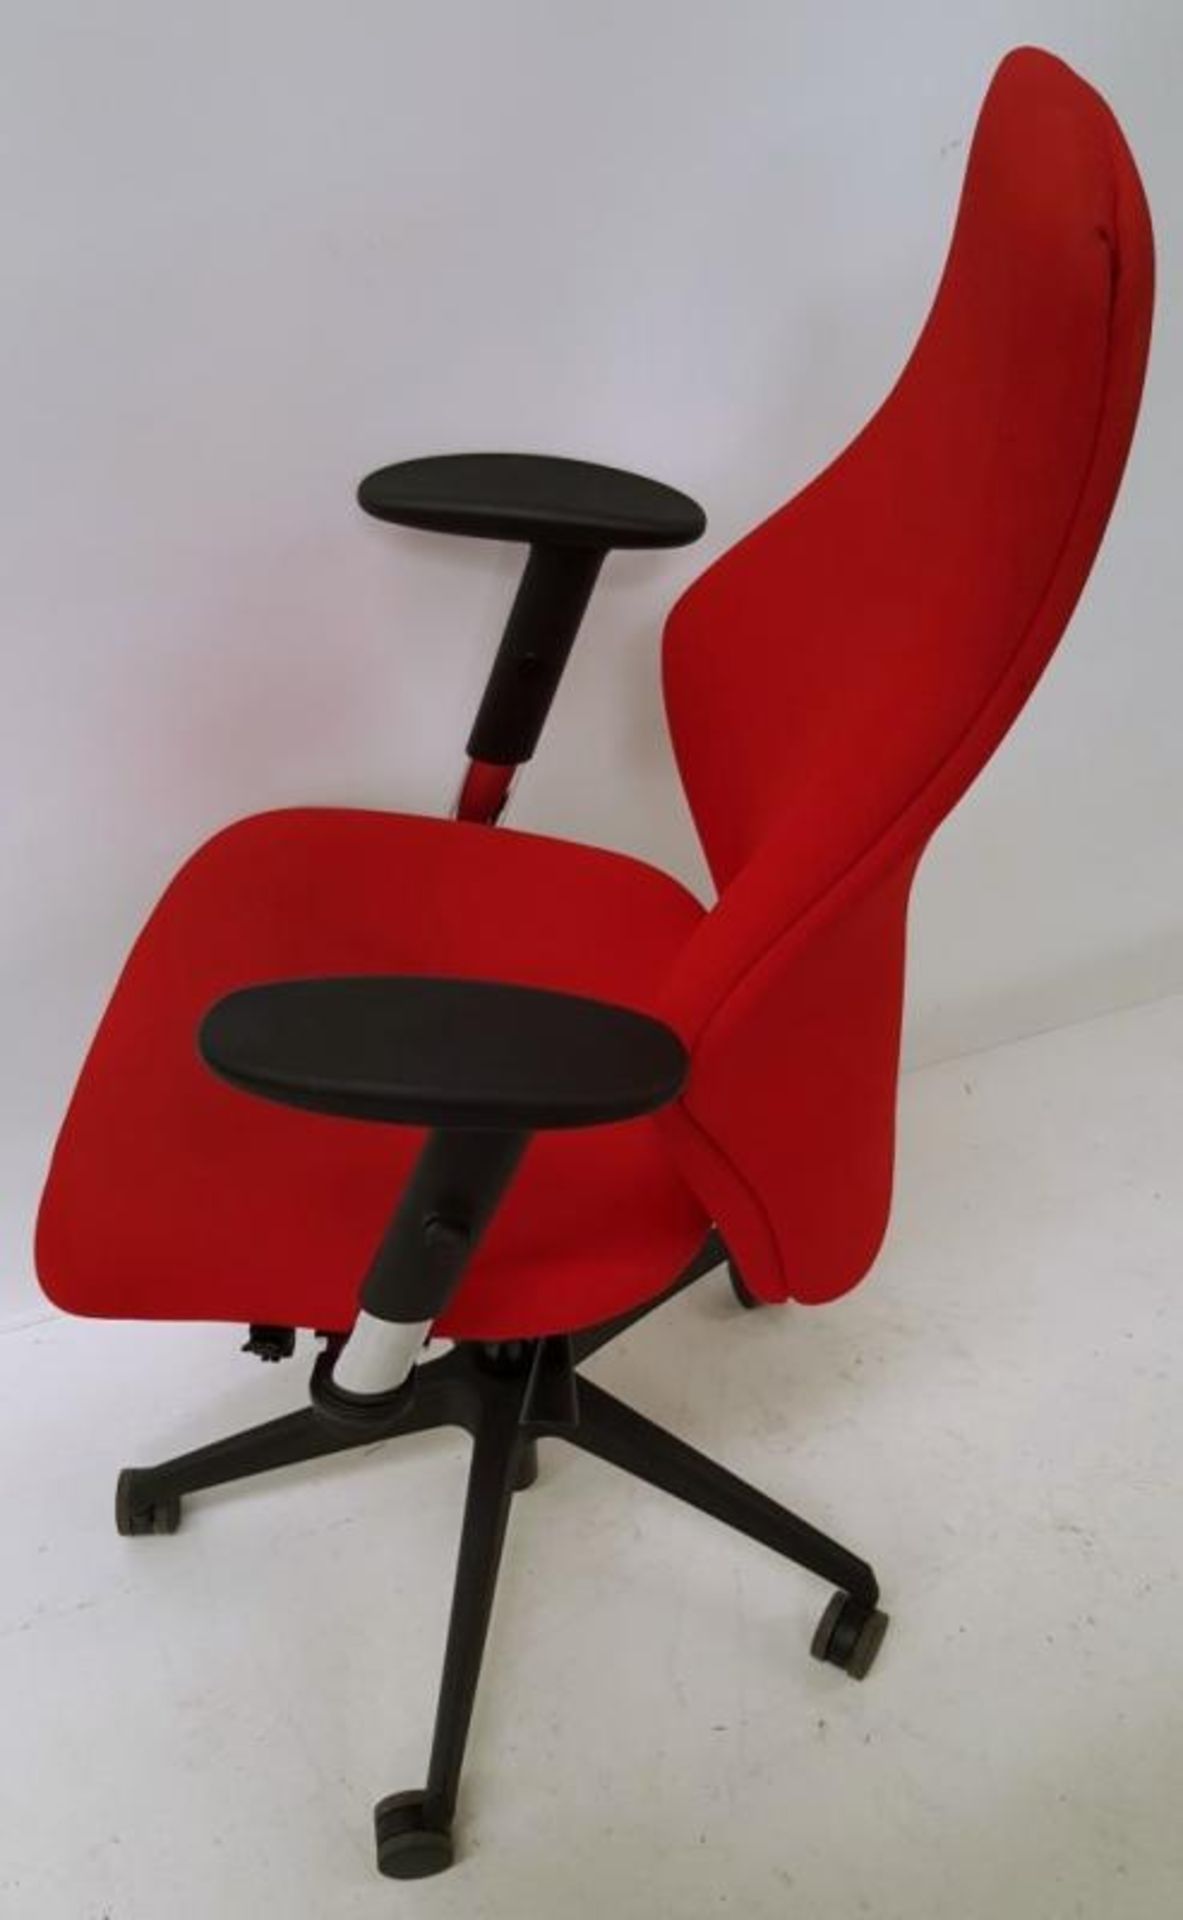 A Pair Of LIMA Branded Premium Adjustable Office Chairs Featuring Fixed Lumbar Support And Arm Rests - Image 6 of 7